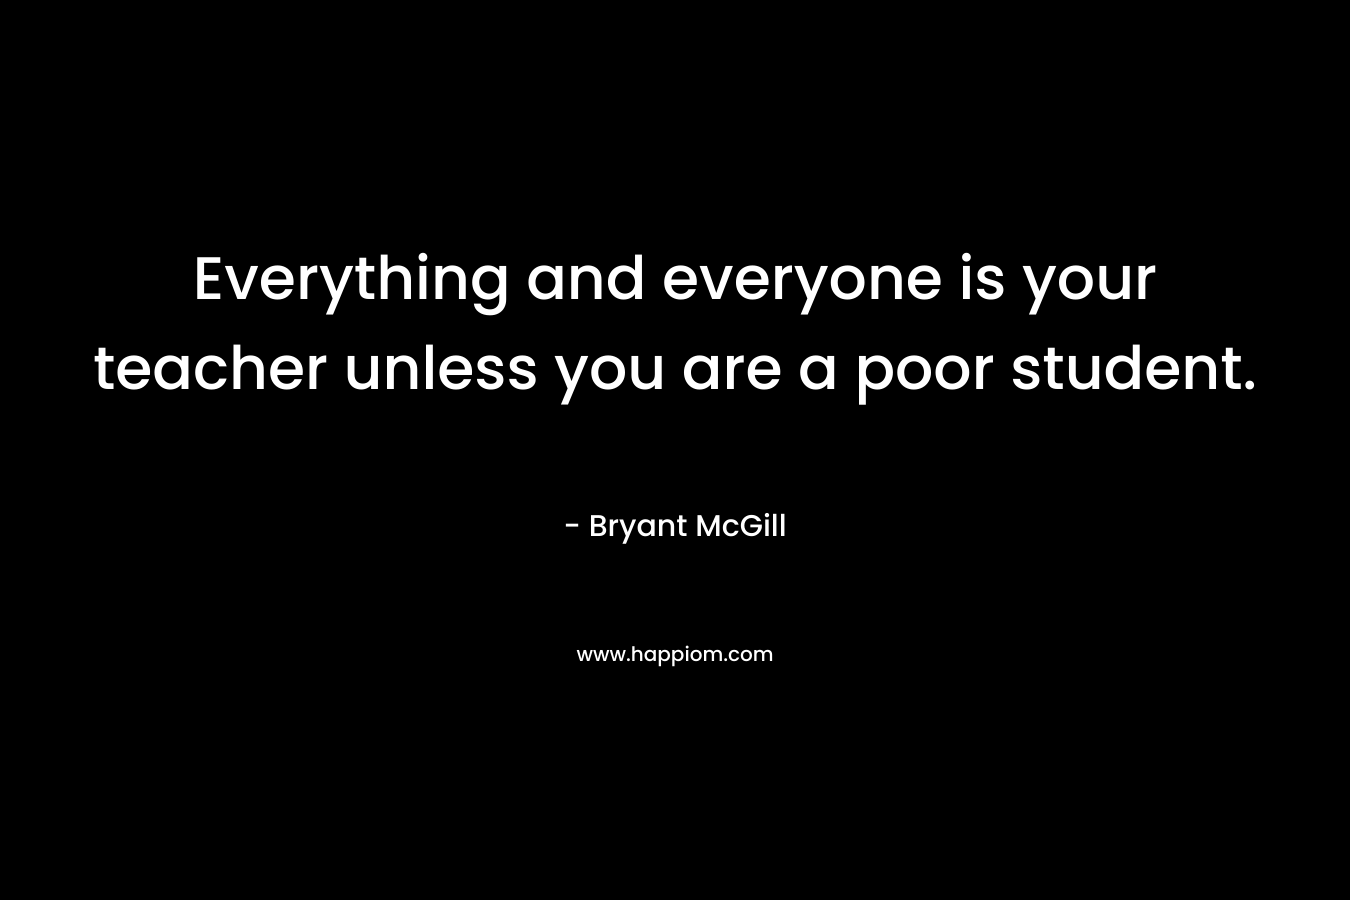 Everything and everyone is your teacher unless you are a poor student.